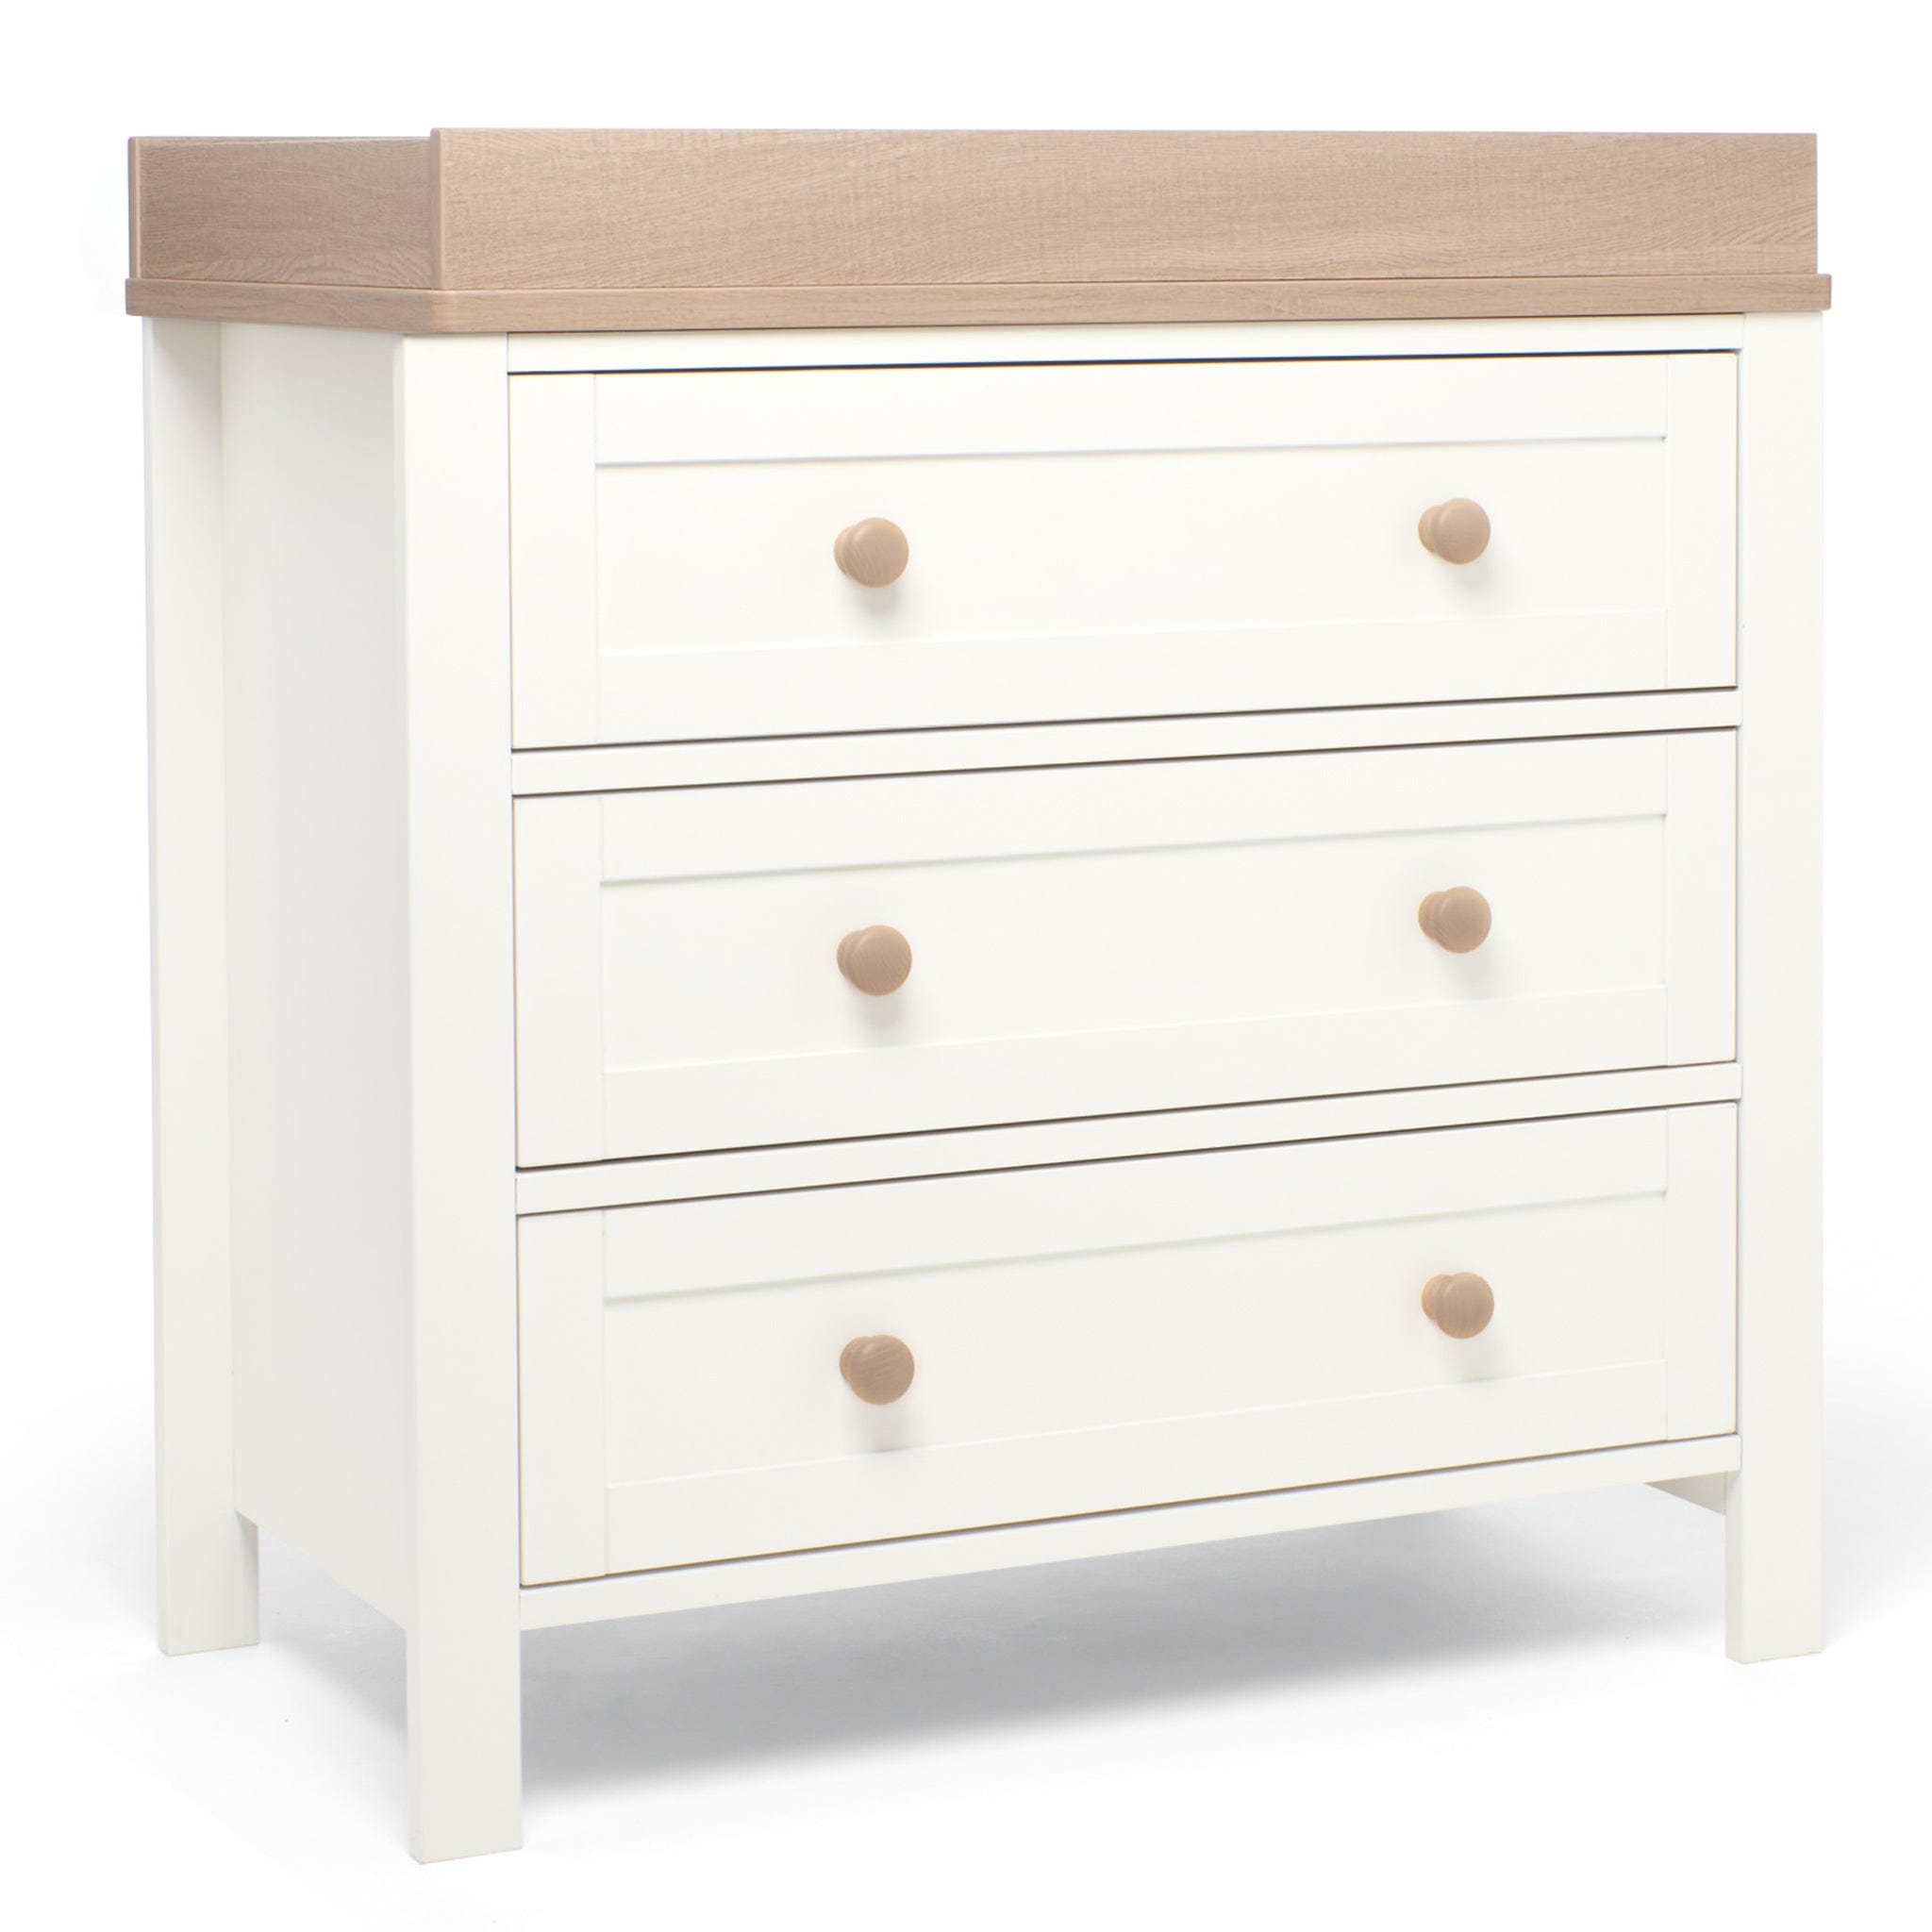 Mamas & Papas Wedmore 3 Piece Cotbed Range in White/Natural Nursery Room Sets